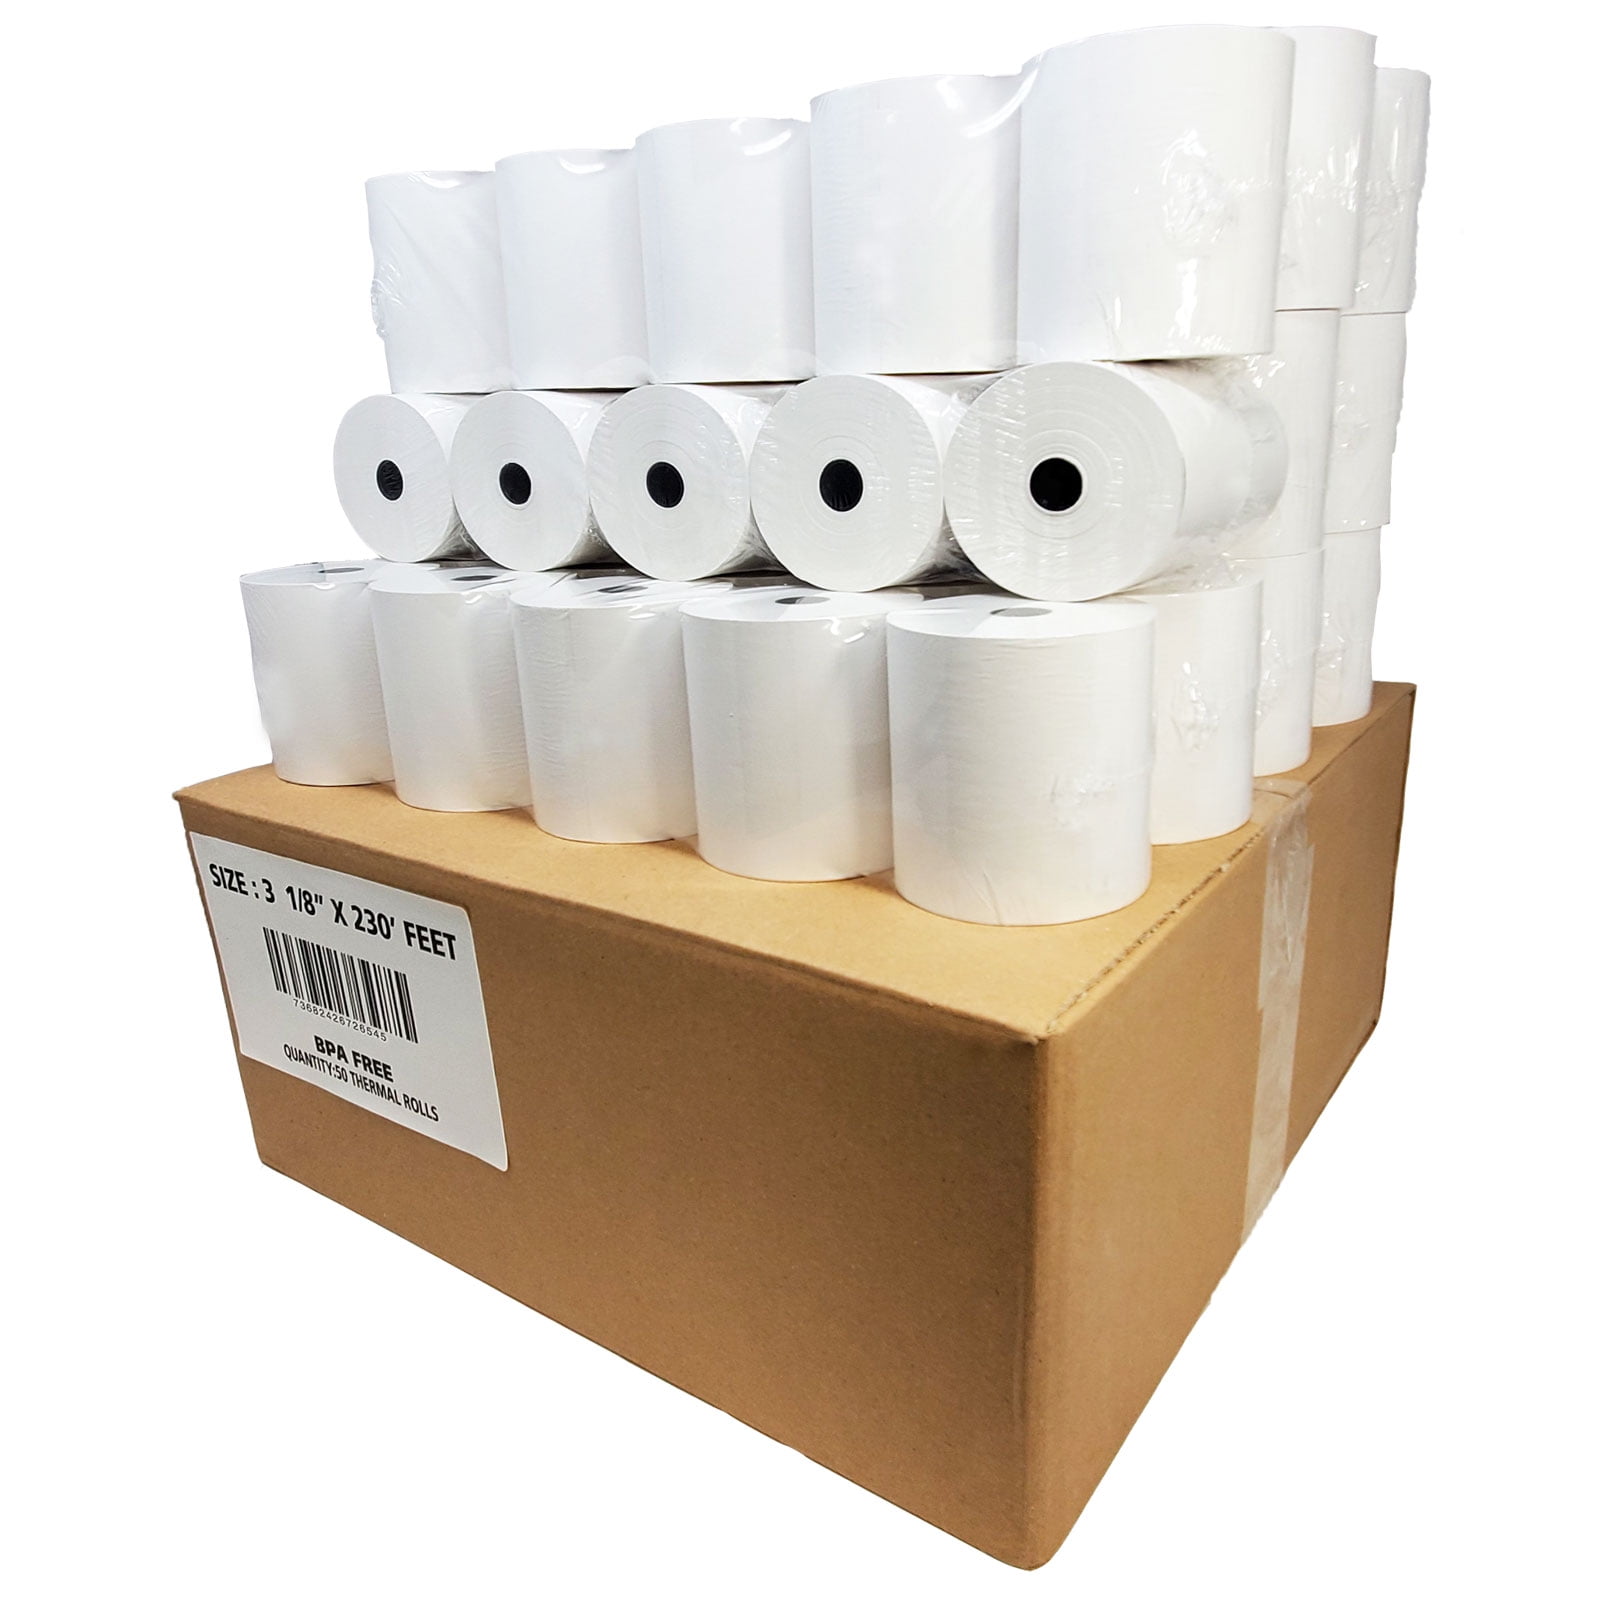 20 NEW ROLLS *FREE SHIPPING* THERMAL PAPER EPSON TM-T88V 3-1/8" x 230' 